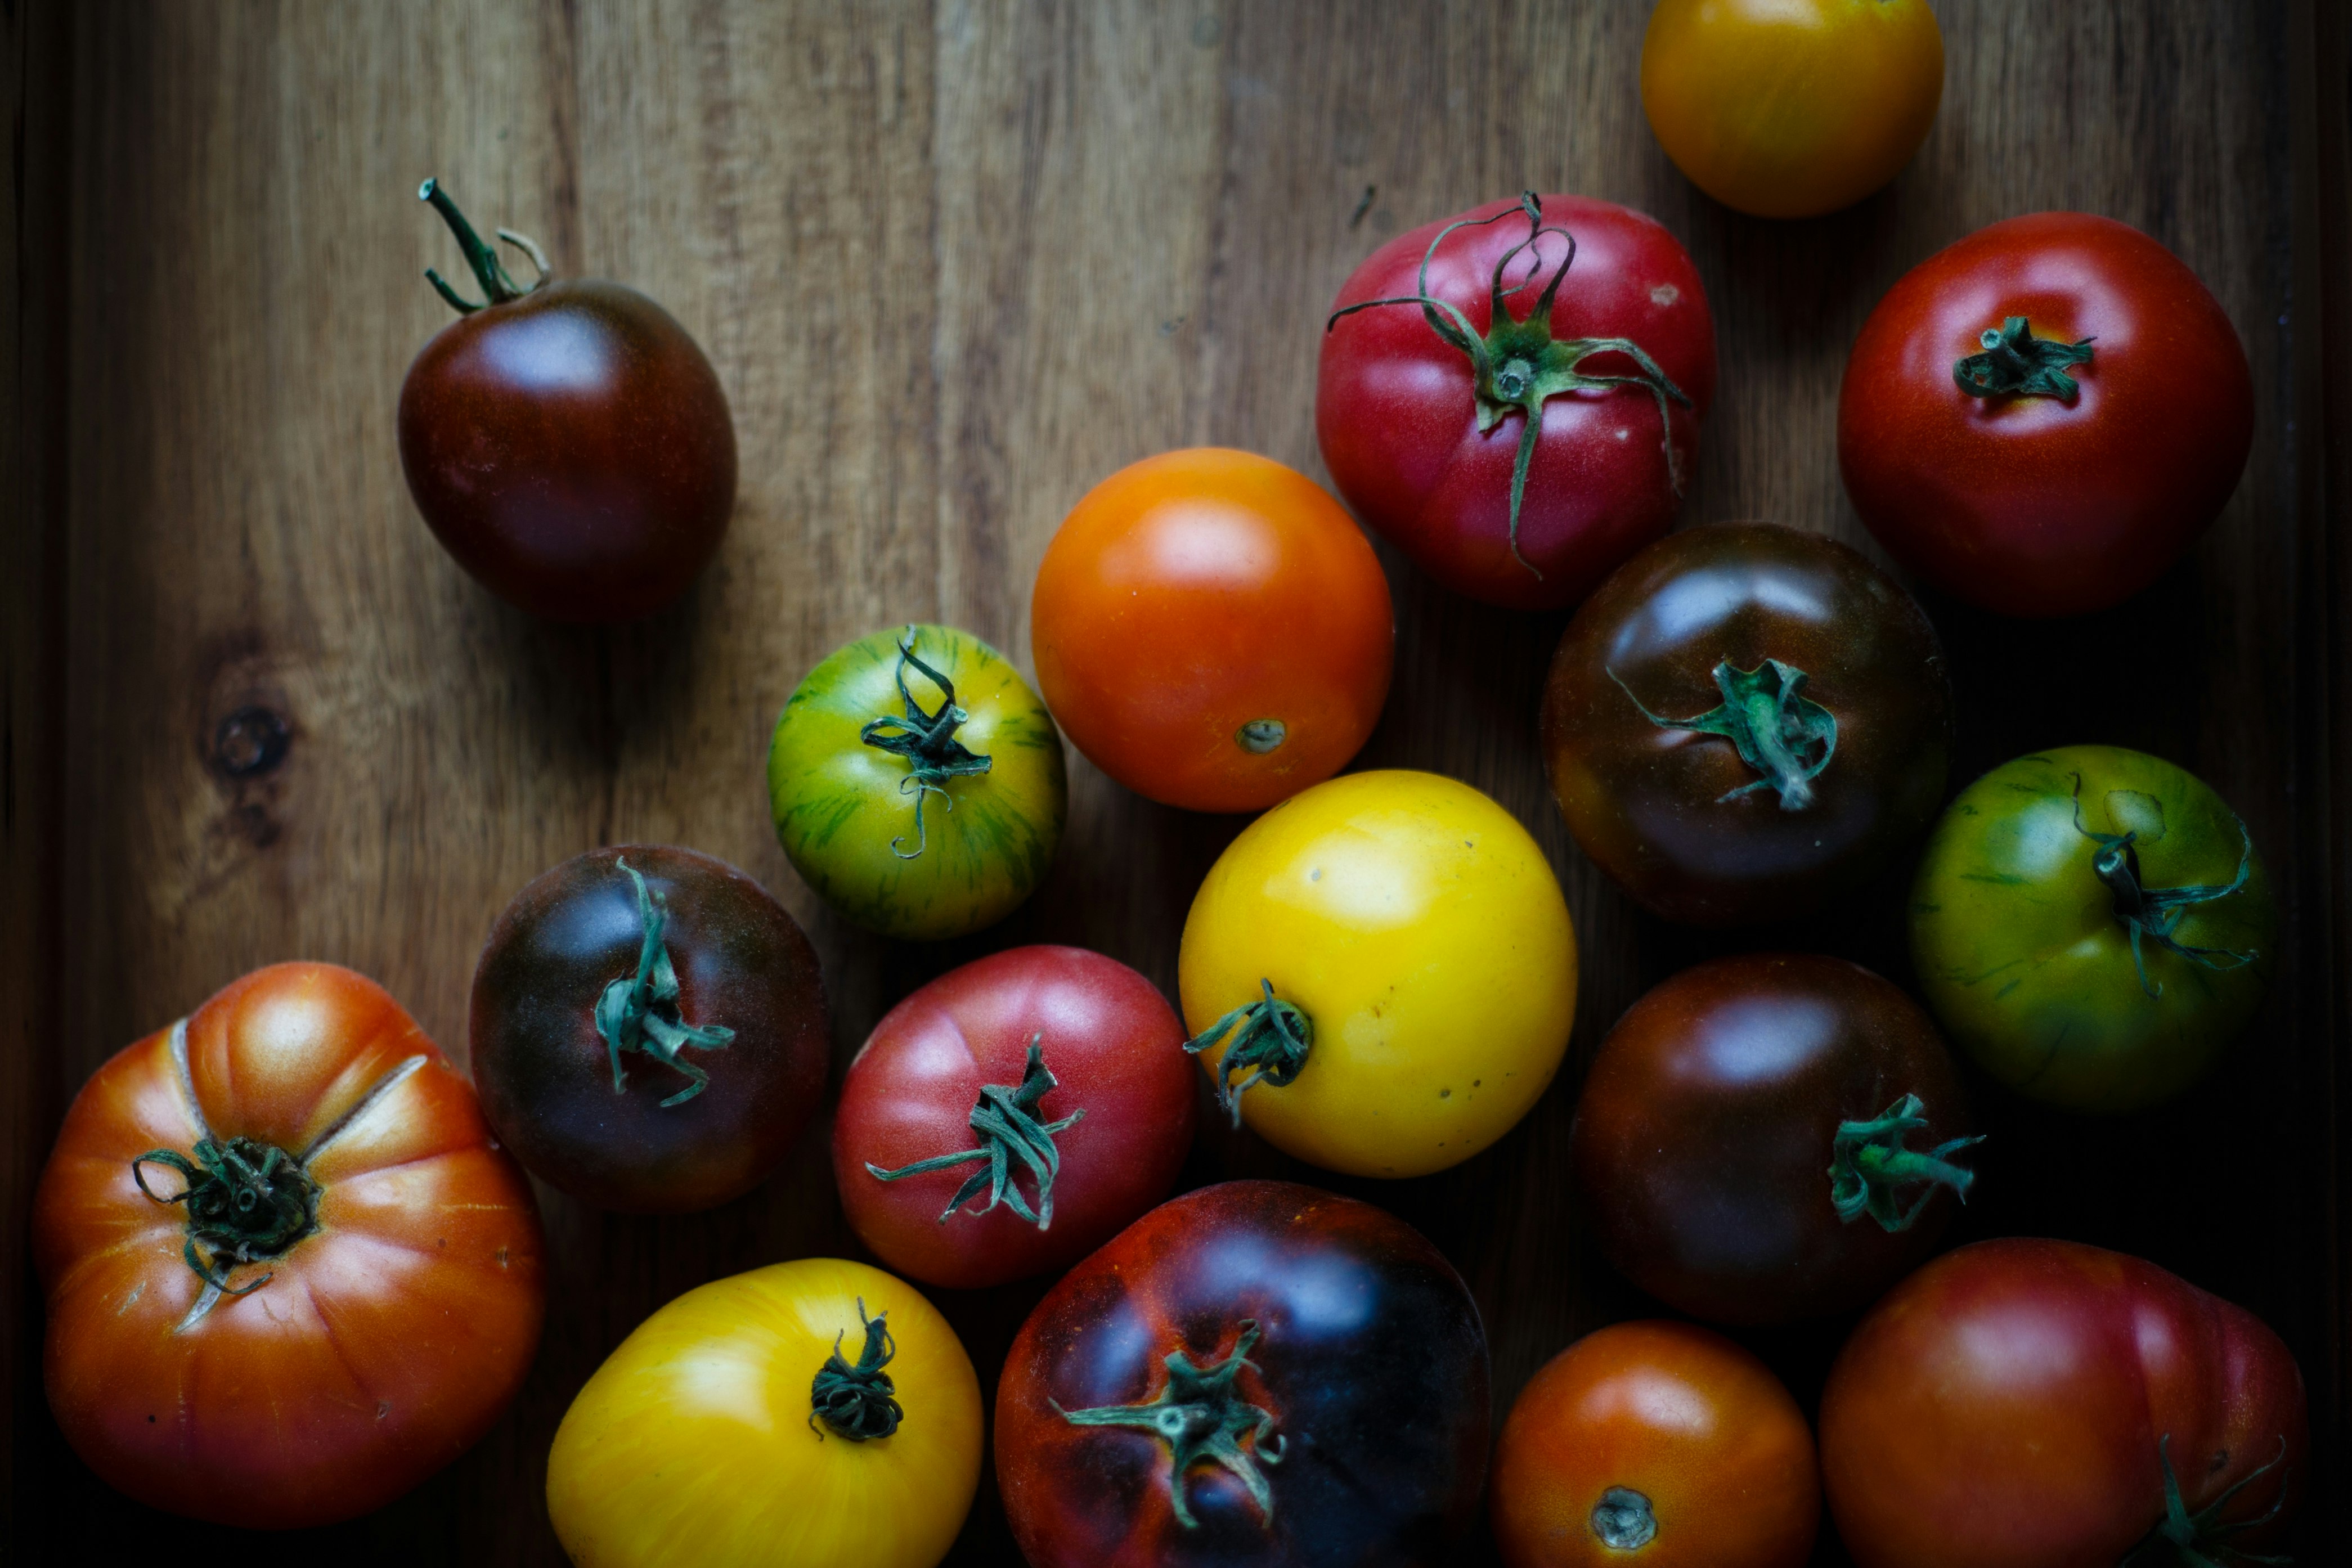 tomatoes of different colors displayed on a wooden table